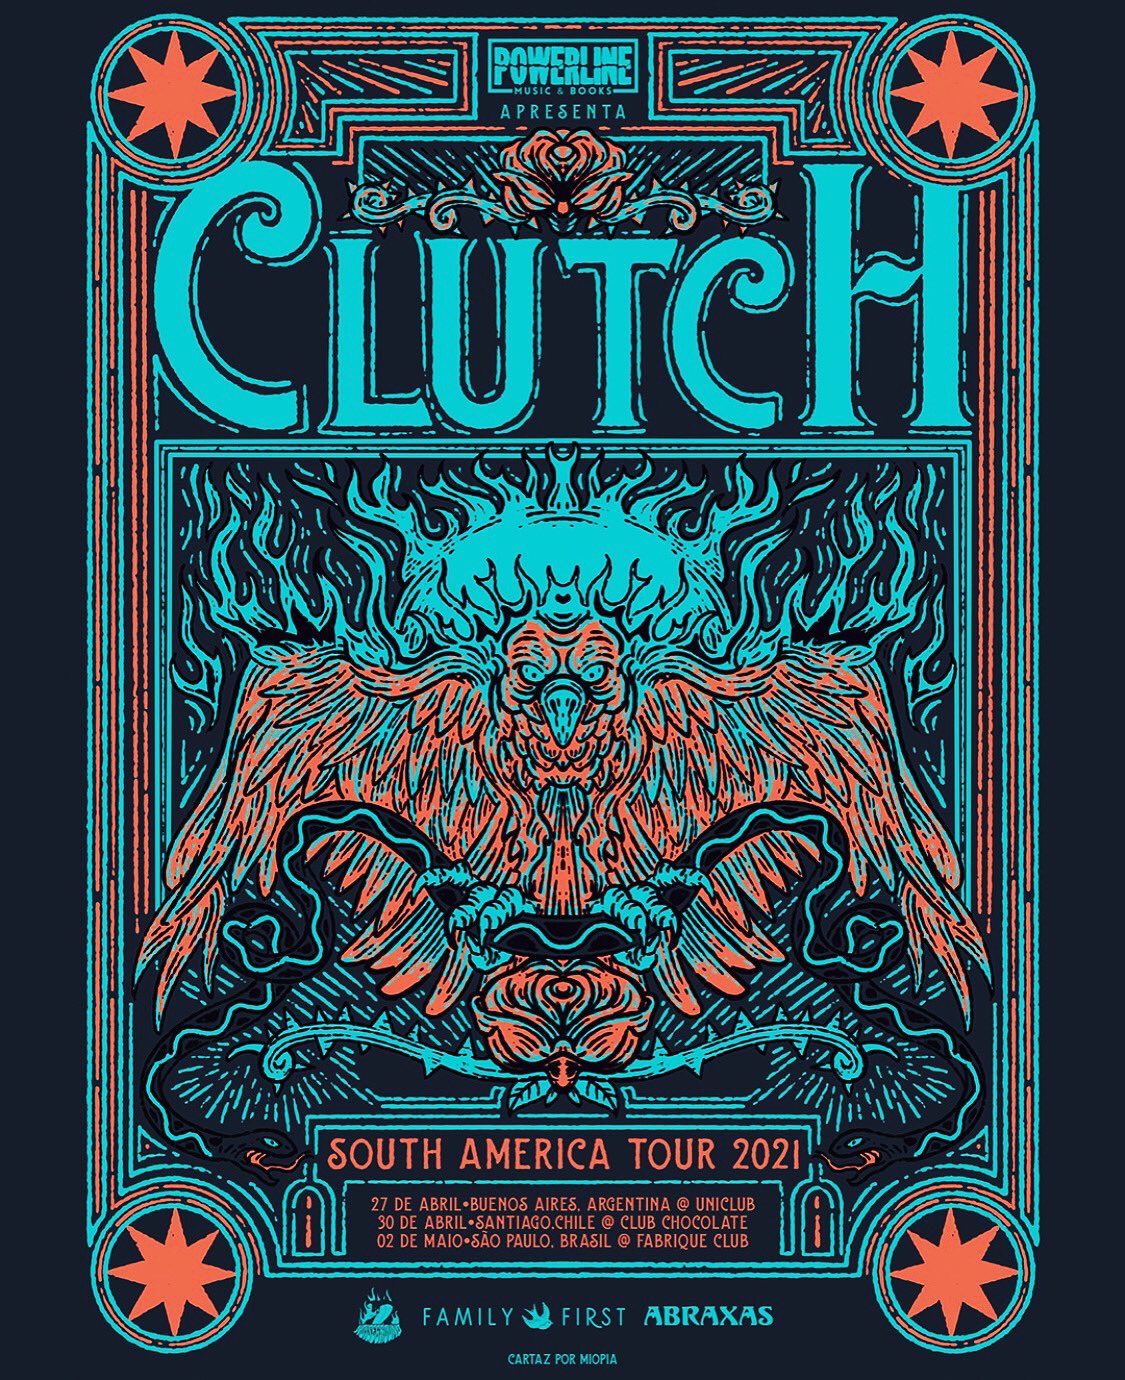 The poster for clutch's tour - Punk